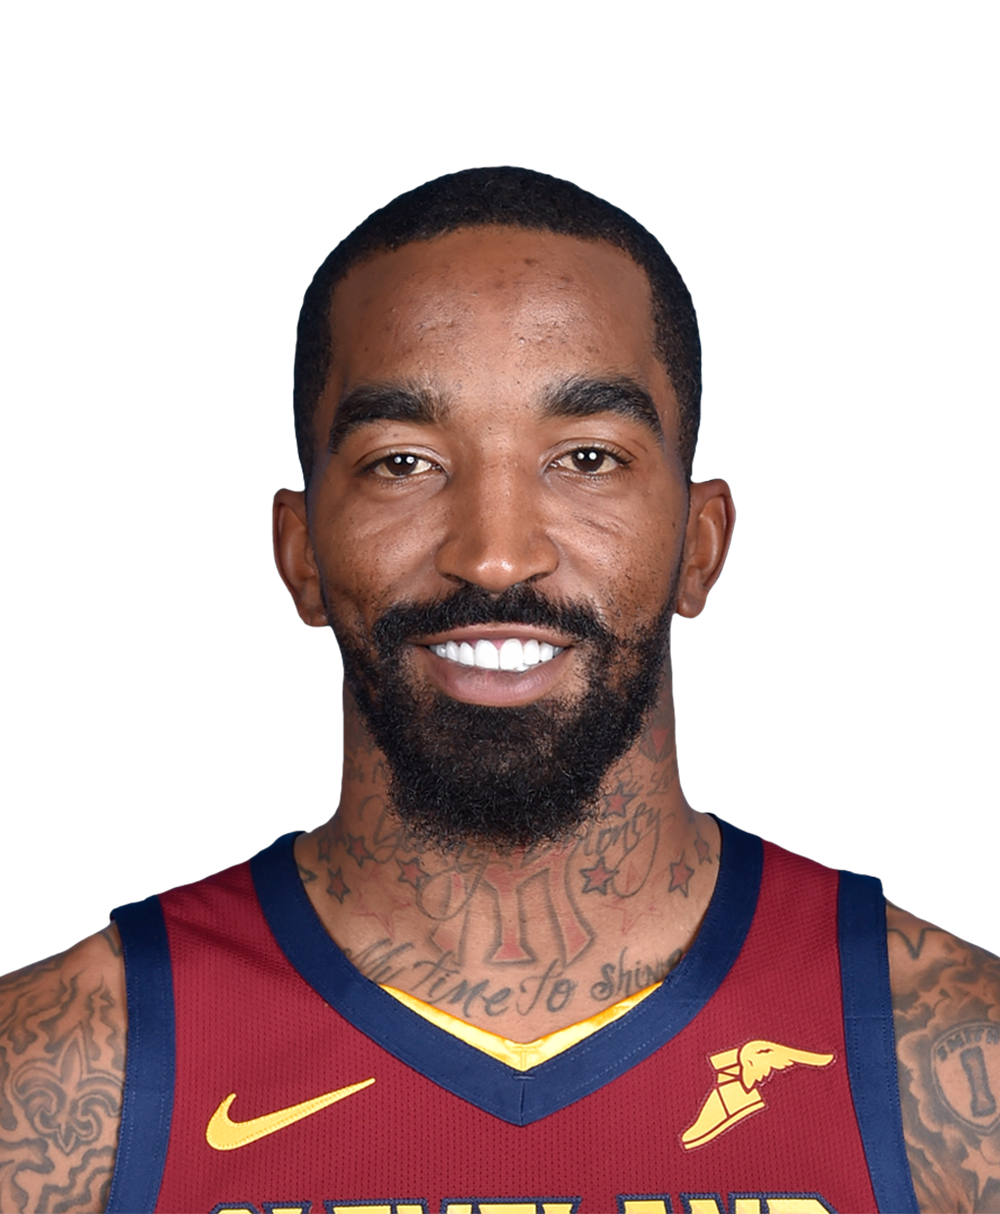 Cleveland Cavaliers: Why Hasn't J.R Smith Re-Signed Yet?